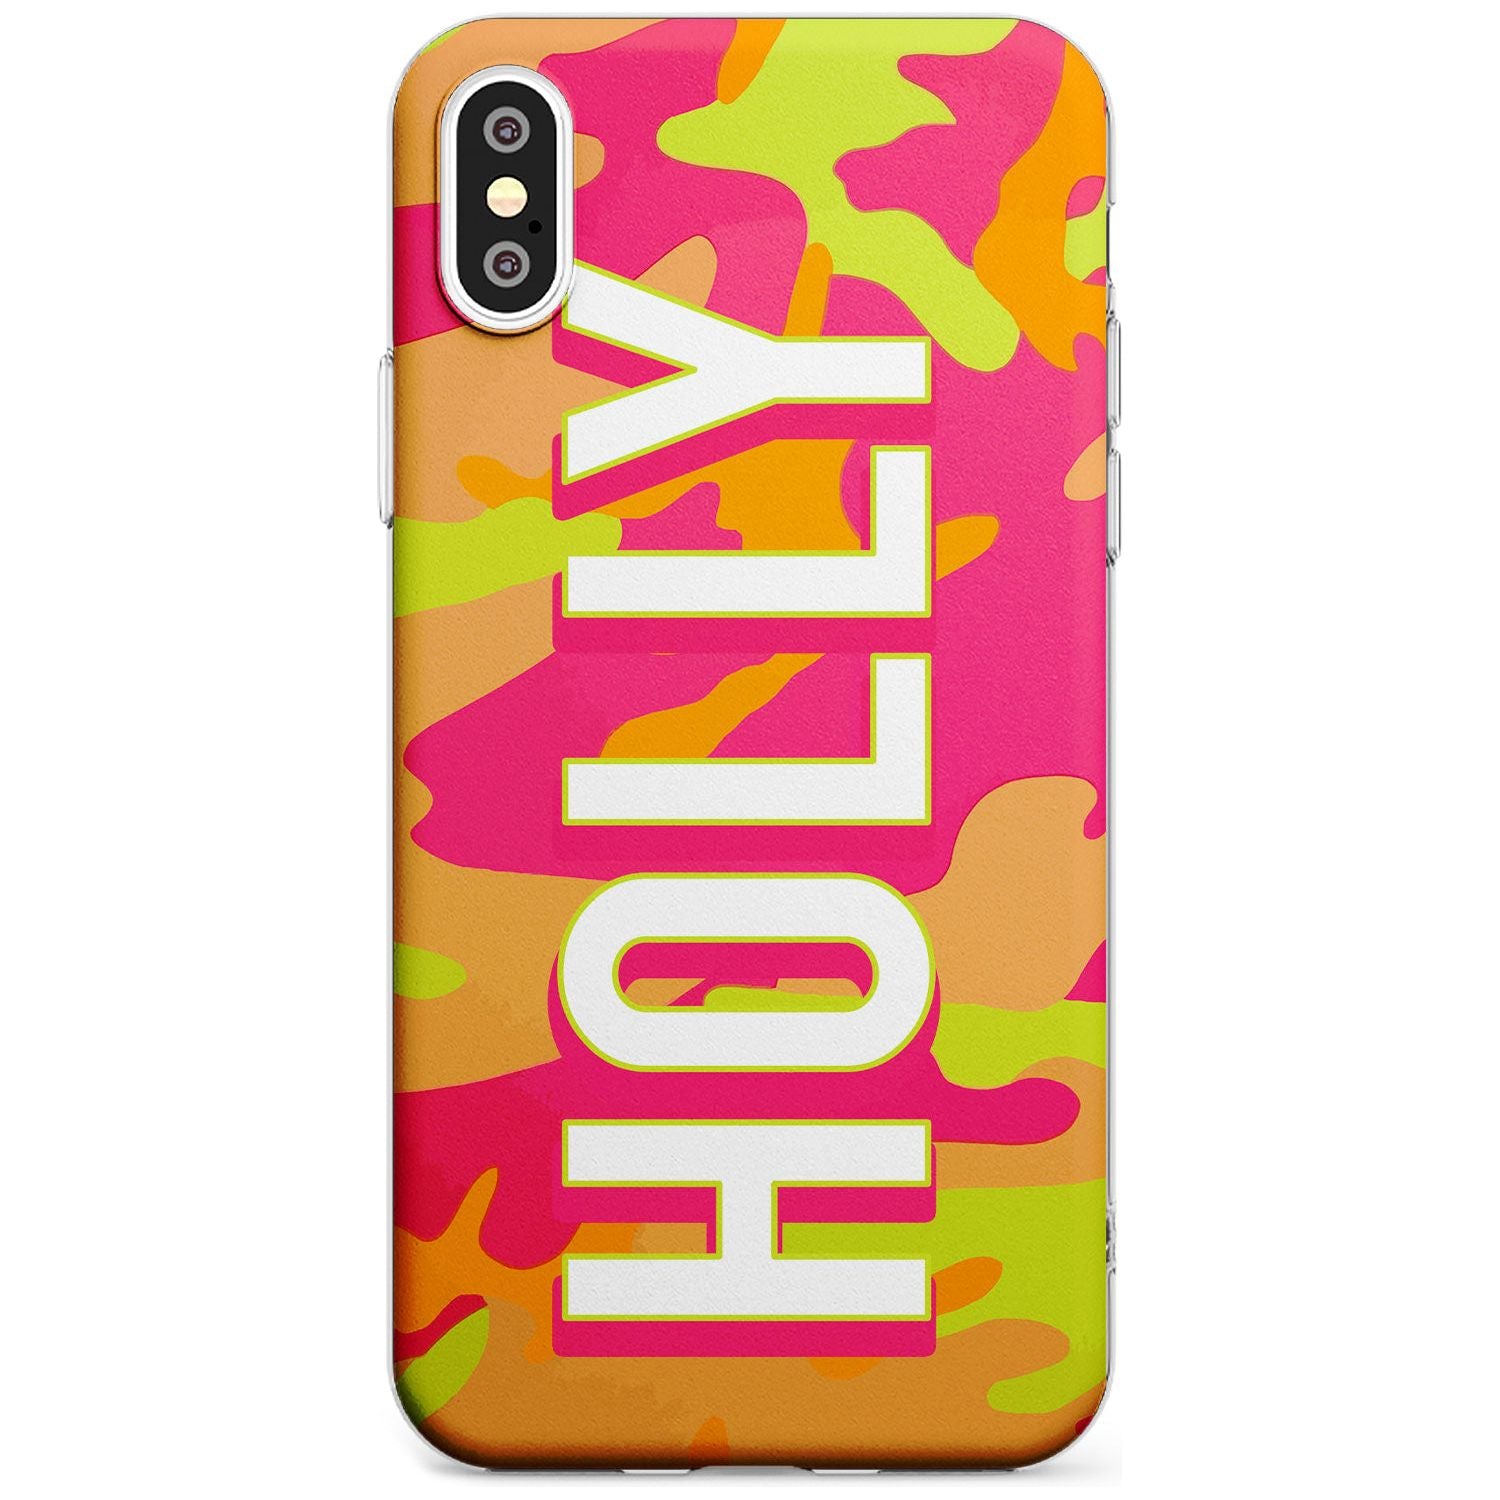 Colourful Neon Camo Black Impact Phone Case for iPhone X XS Max XR